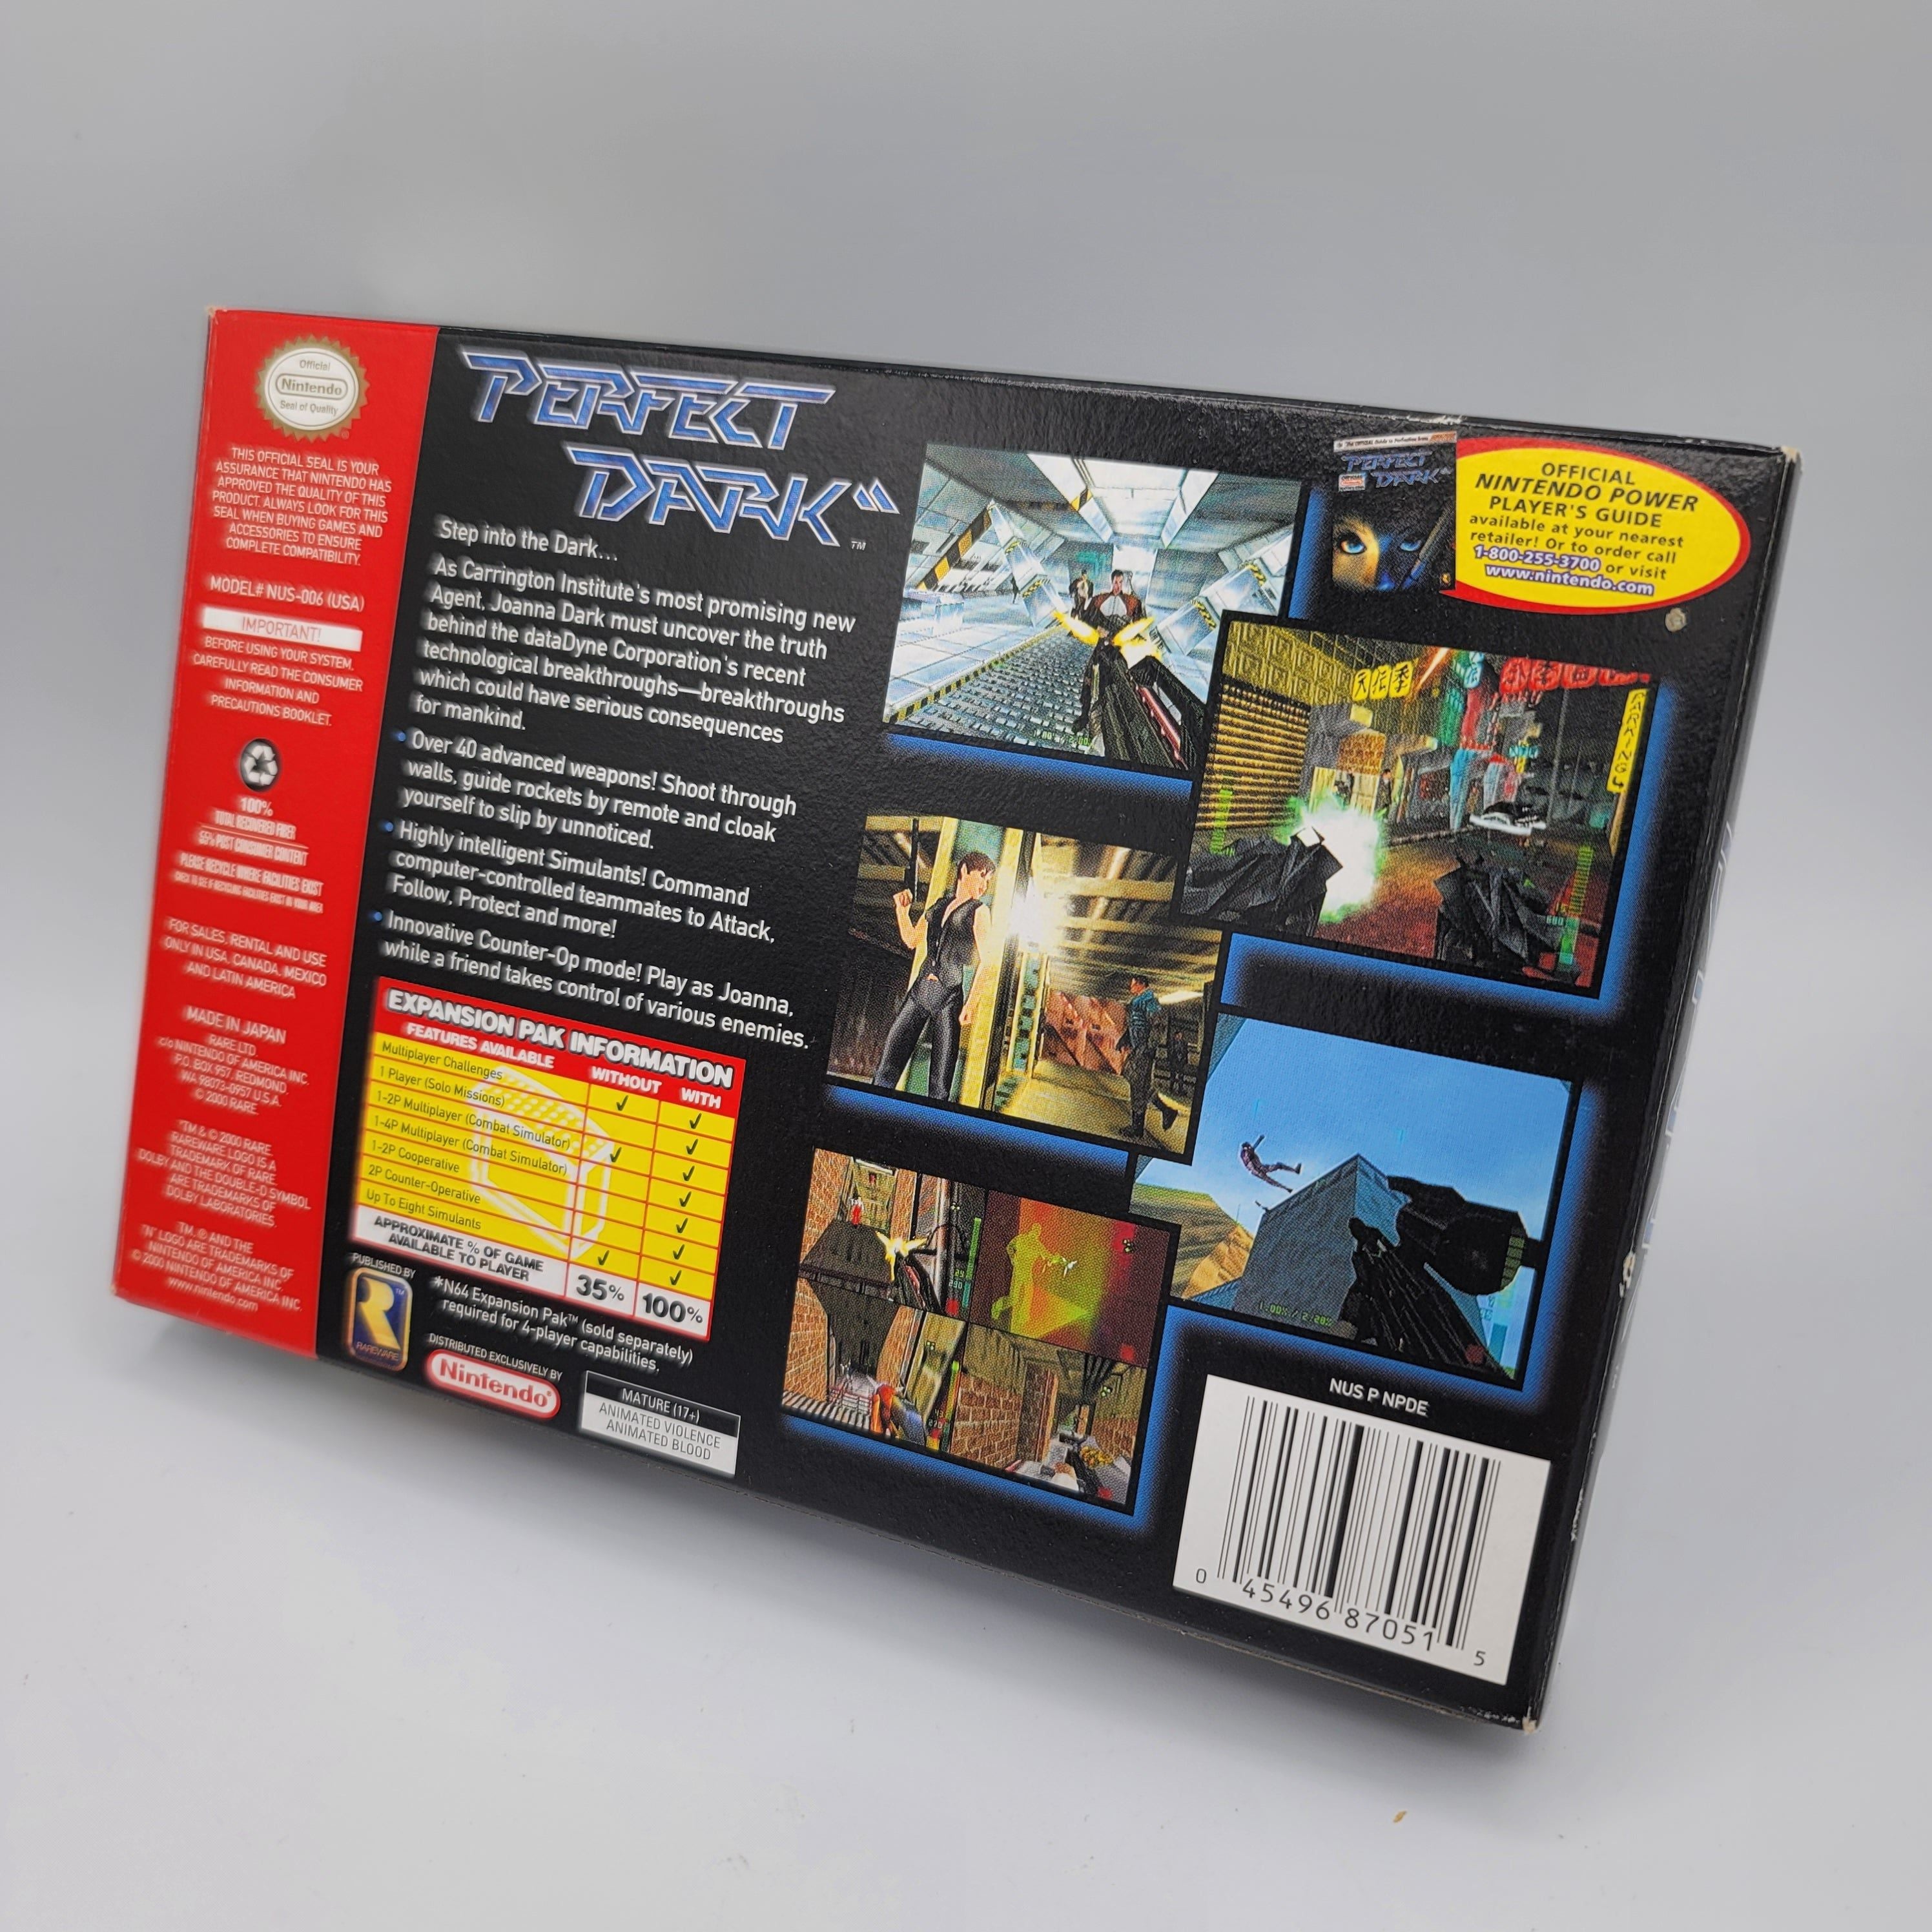 N64 - Perfect Dark (Complete in Box / A / With Manual)